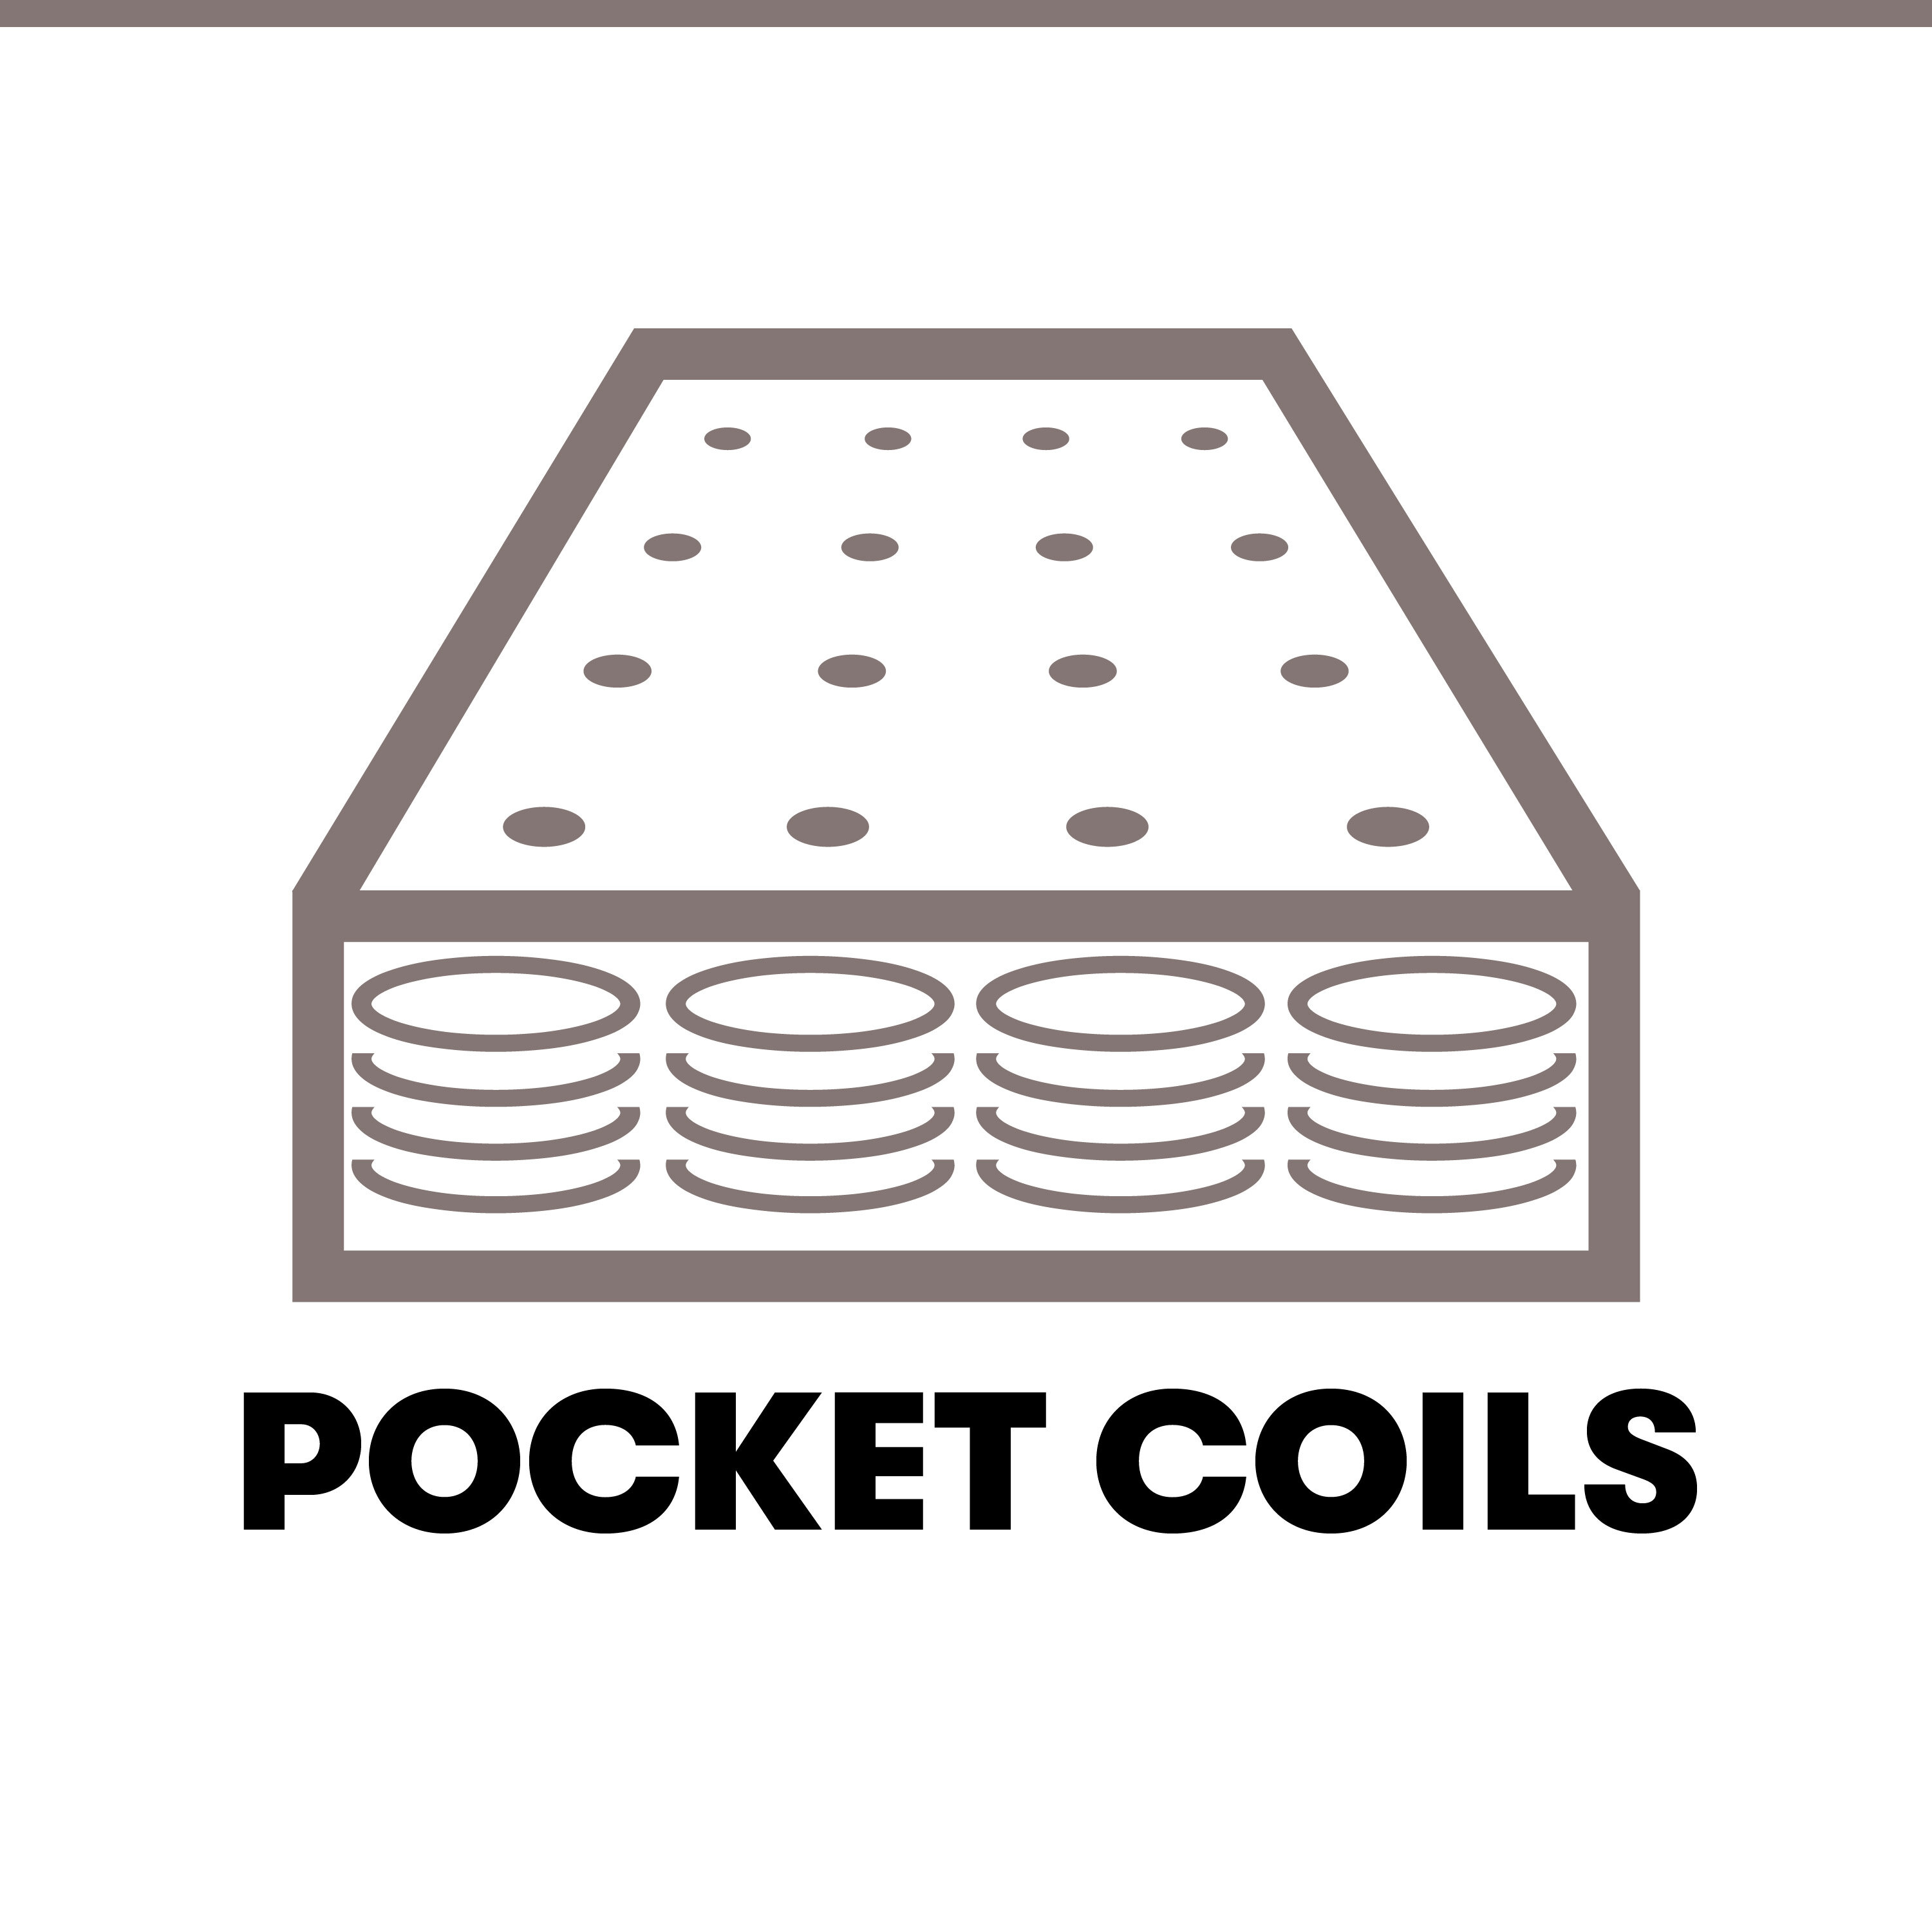 Pocket Coil Seating Construction